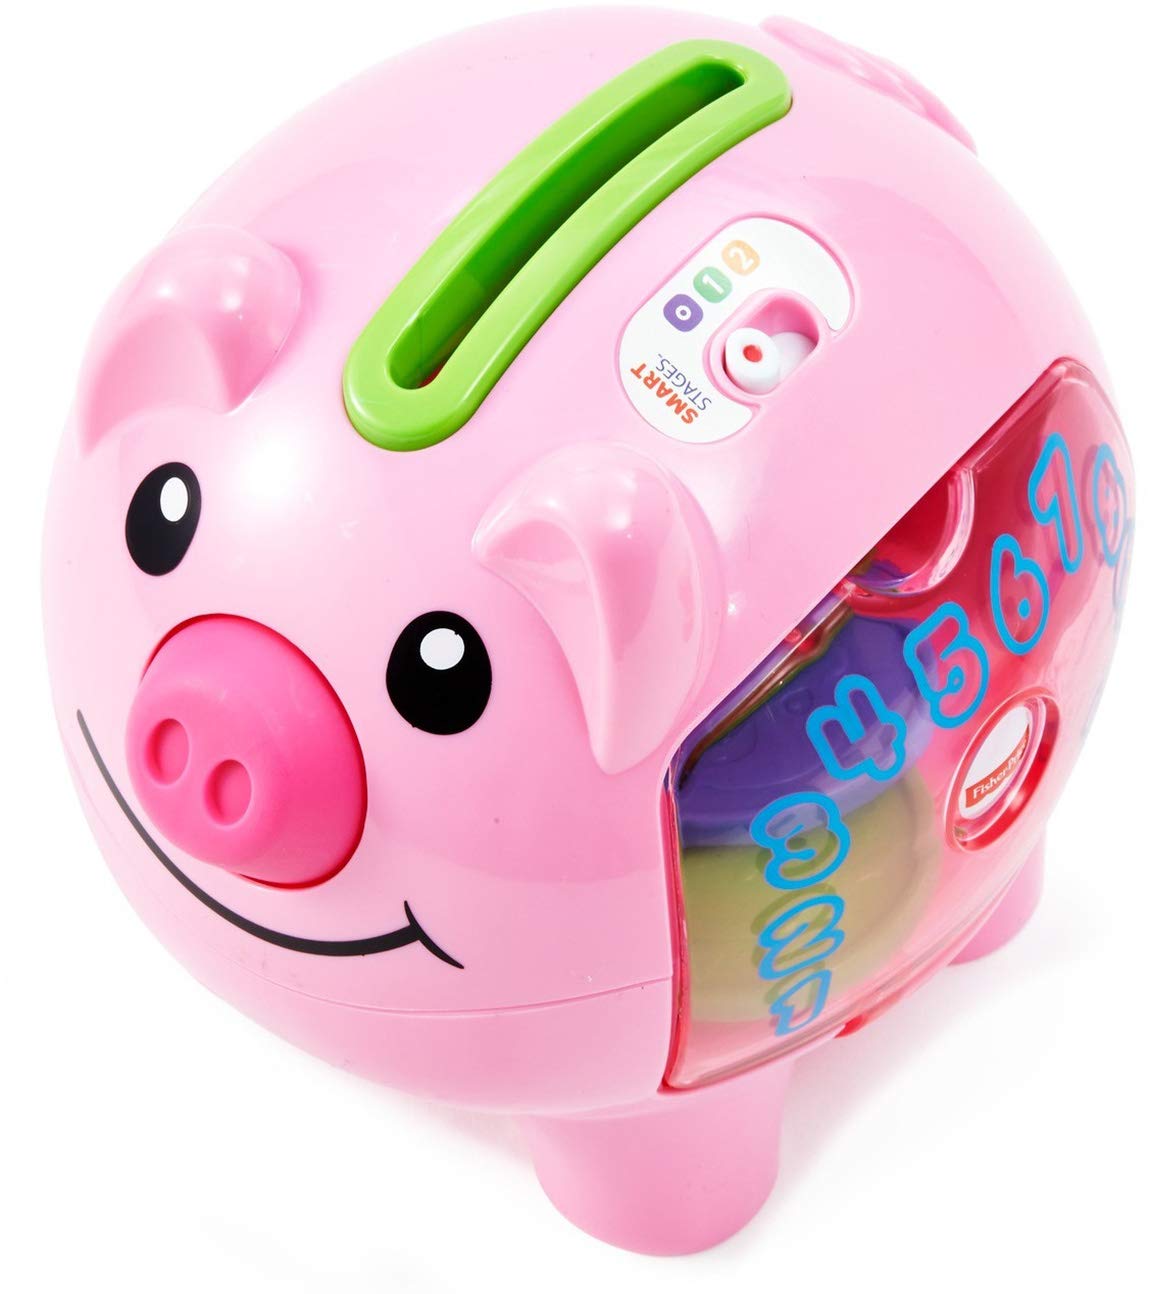 Fisher-Price Laugh & Learn Smart Stages Piggy Bank, Cha-ching! Get Ready To Cash In On Playtime Fun And Learning!